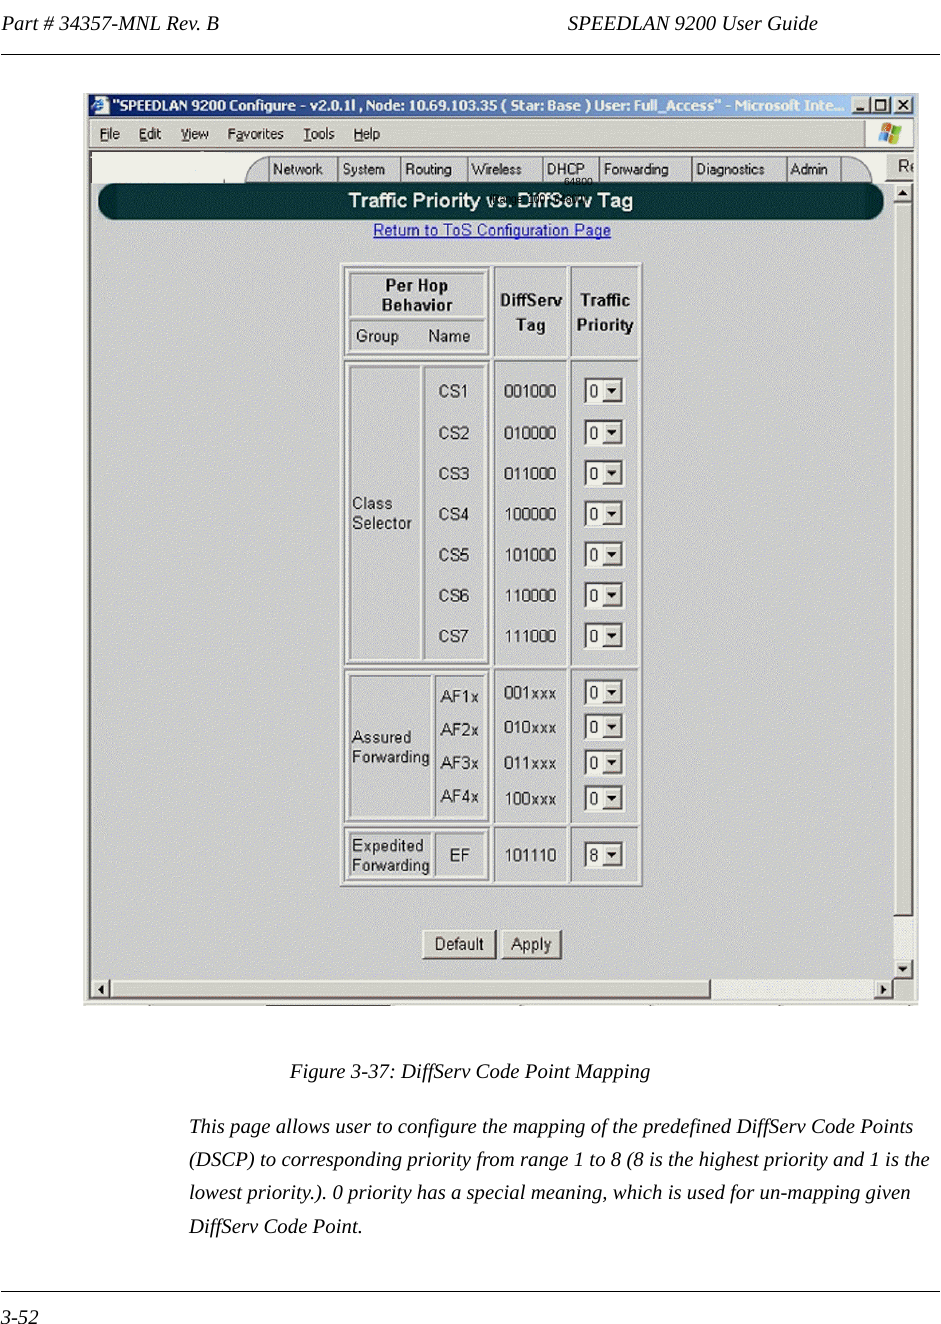 Part # 34357-MNL Rev. B                                                                   SPEEDLAN 9200 User Guide 3-52 Figure 3-37: DiffServ Code Point MappingThis page allows user to configure the mapping of the predefined DiffServ Code Points (DSCP) to corresponding priority from range 1 to 8 (8 is the highest priority and 1 is the lowest priority.). 0 priority has a special meaning, which is used for un-mapping given DiffServ Code Point.64800(Range: 100 - 64800)